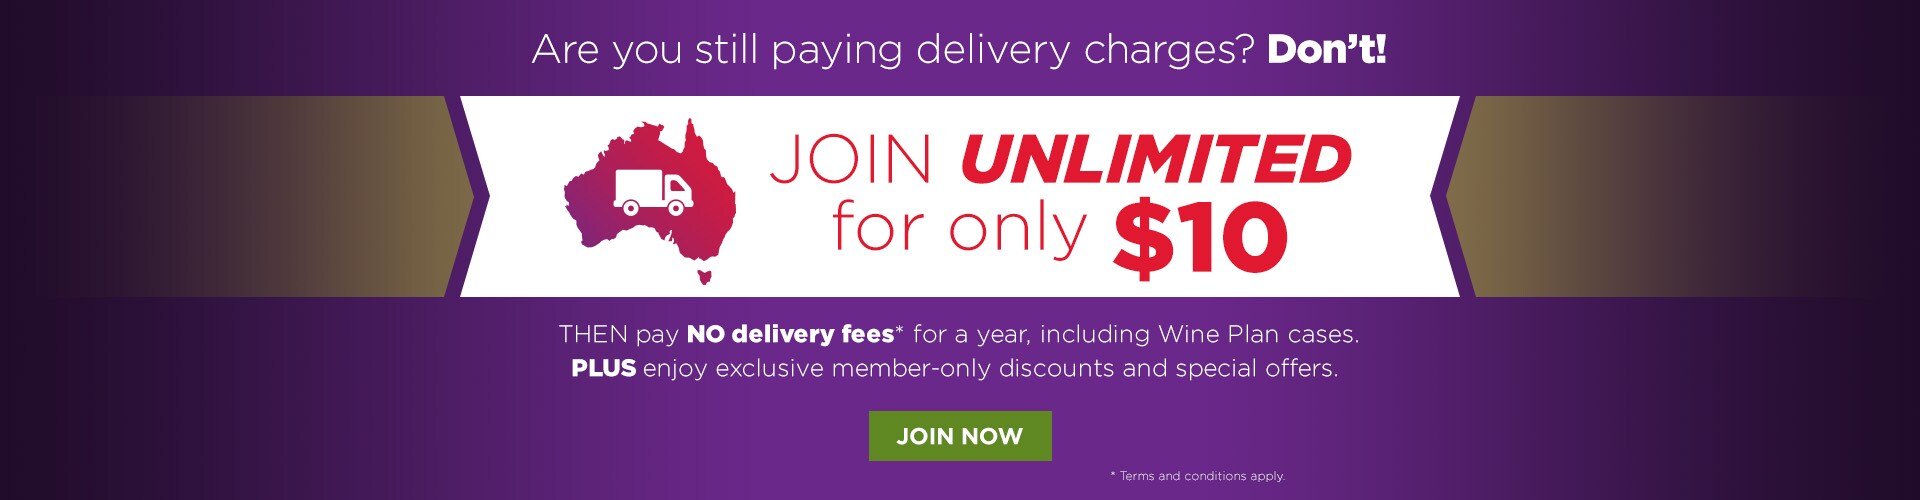 Join UNLIMITED for only $10!